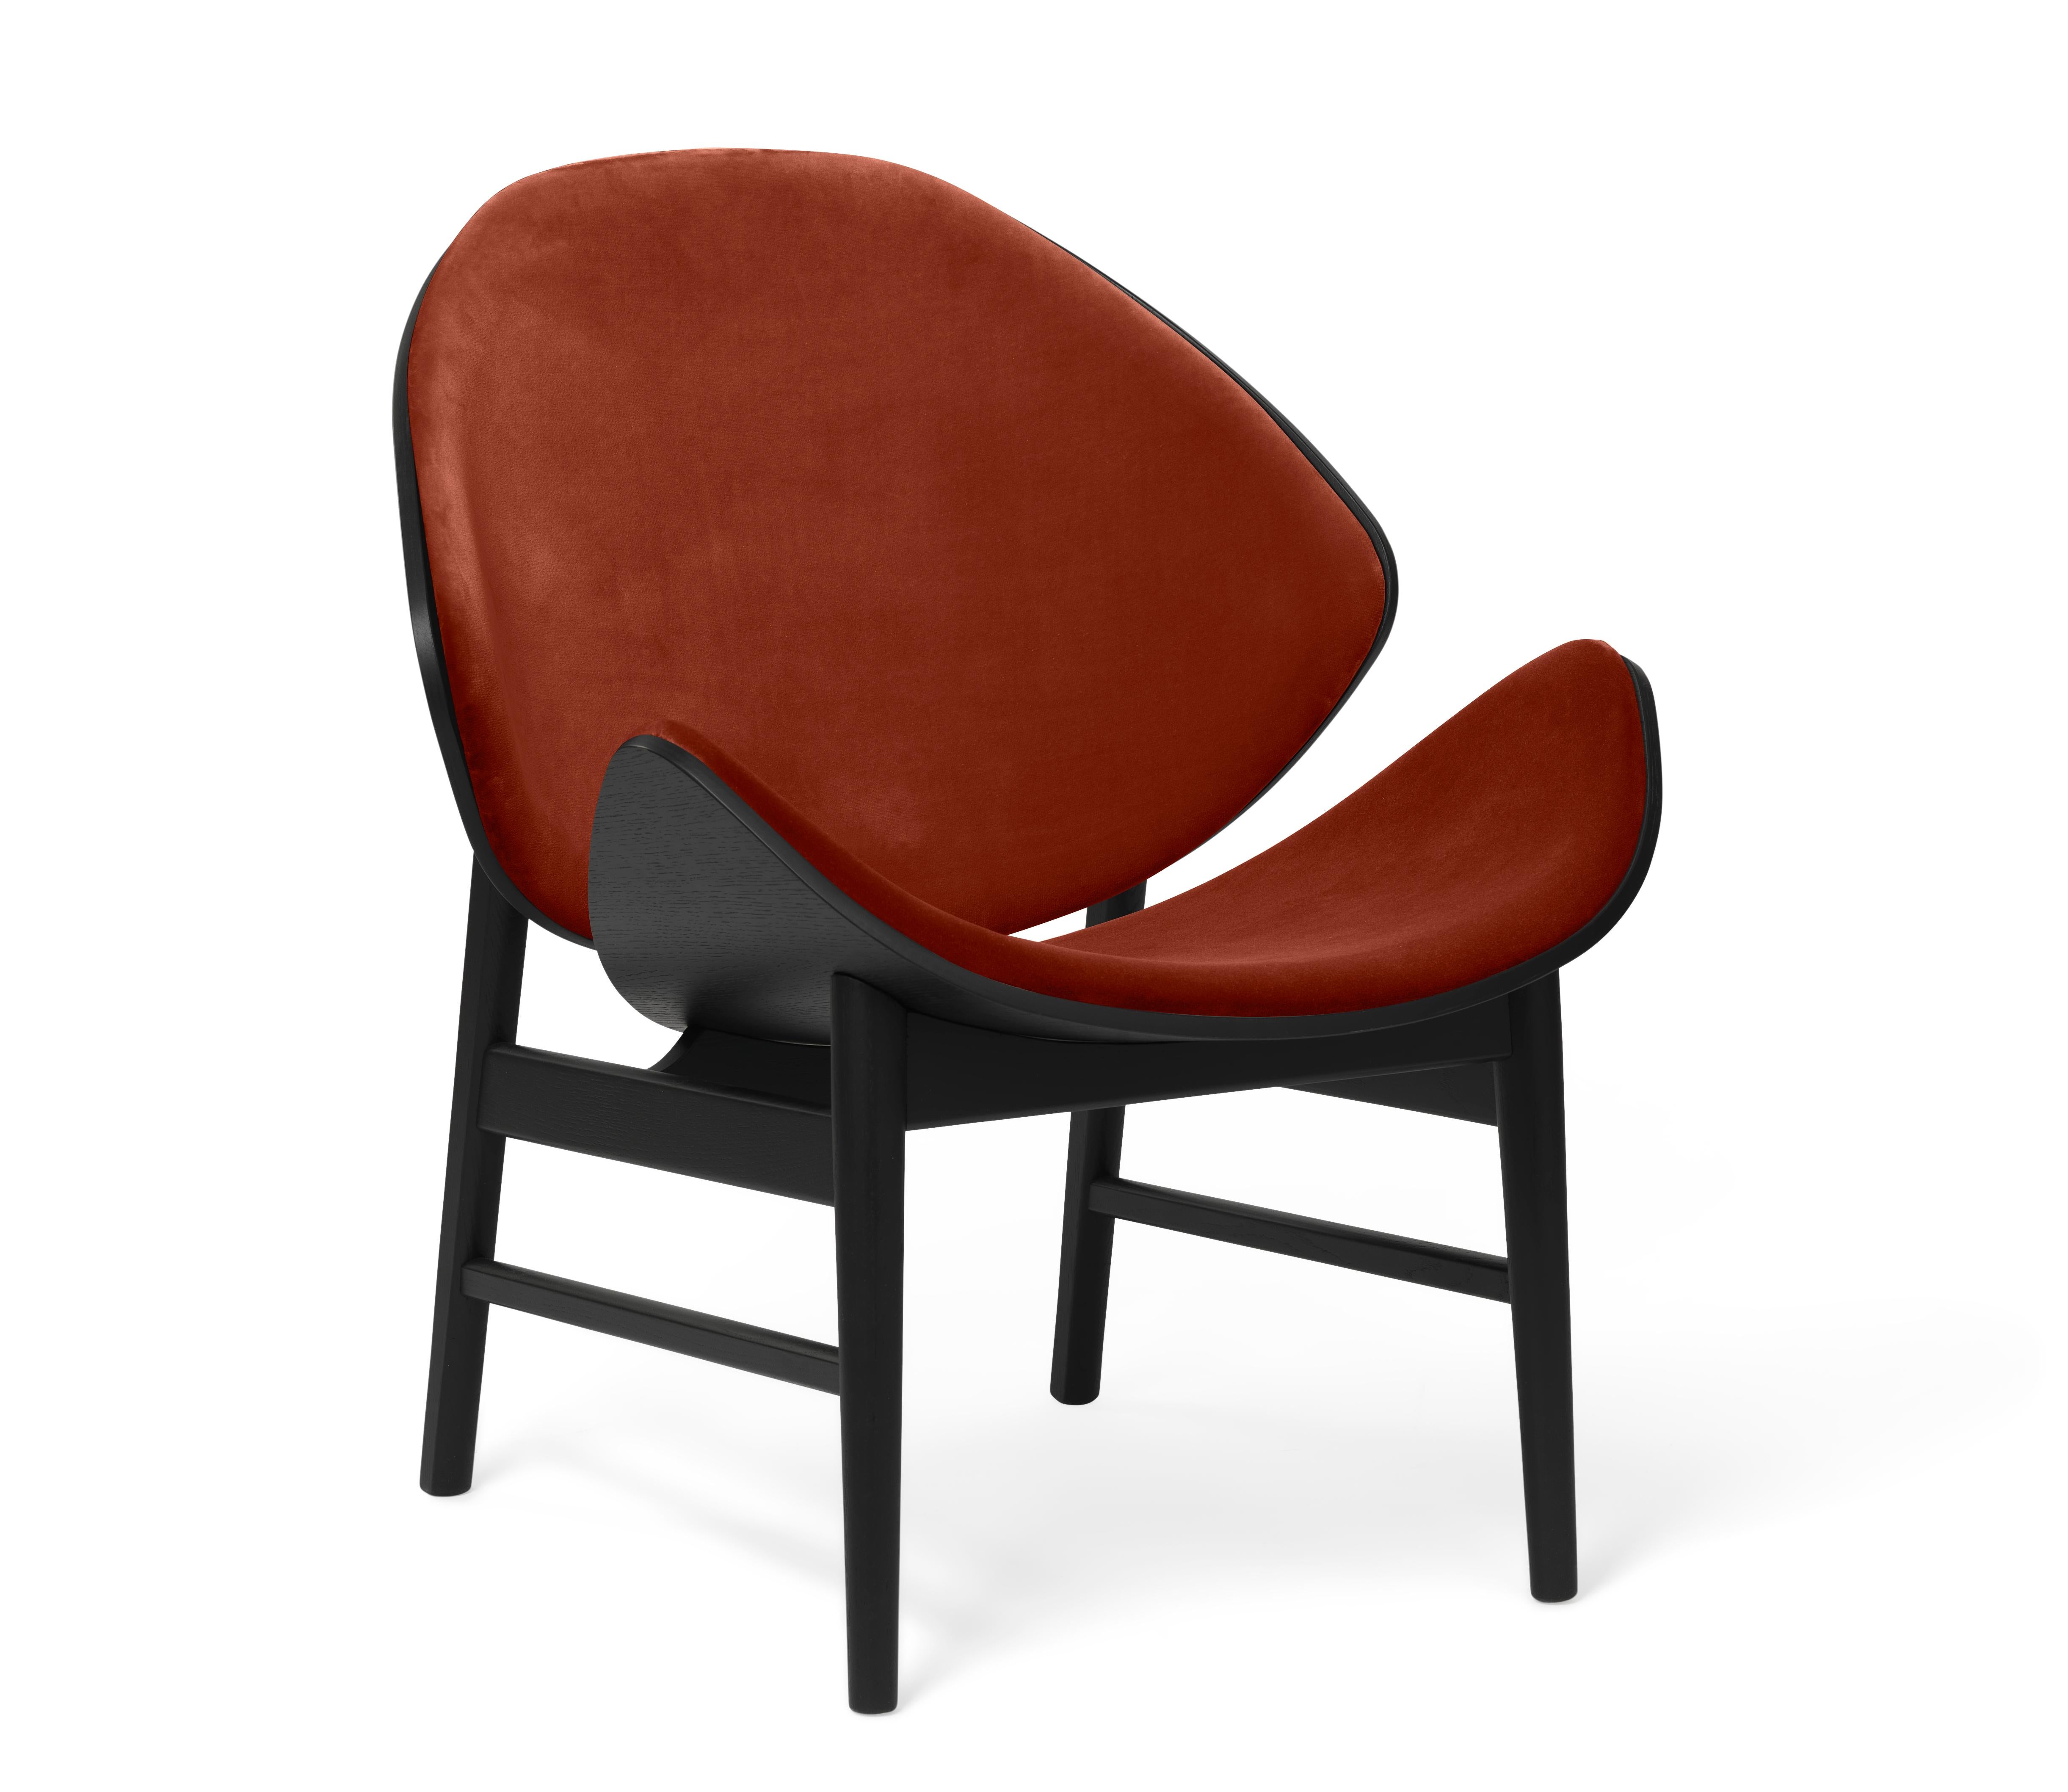 For Sale: Red (Ritz 3701) Orange Monochrome Lounge Chair in Black Oak with Upholstery, by Hans Olsen